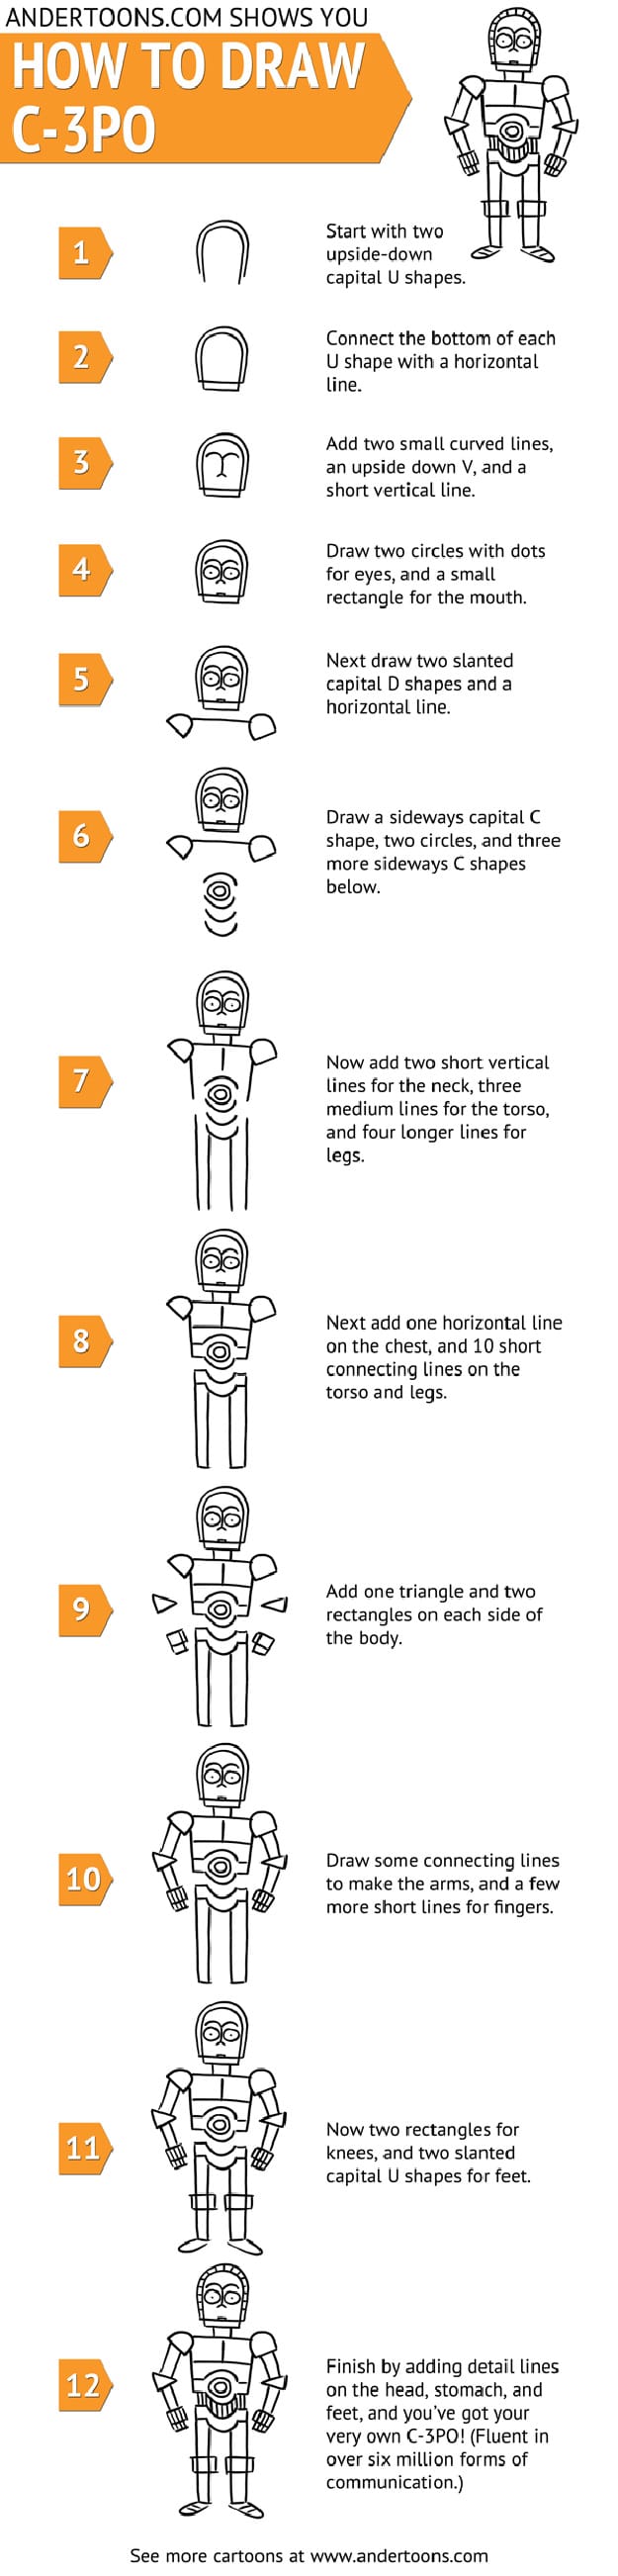 How To: Doodle A Cartoon C-3PO In 12 Simple Steps [Chart]